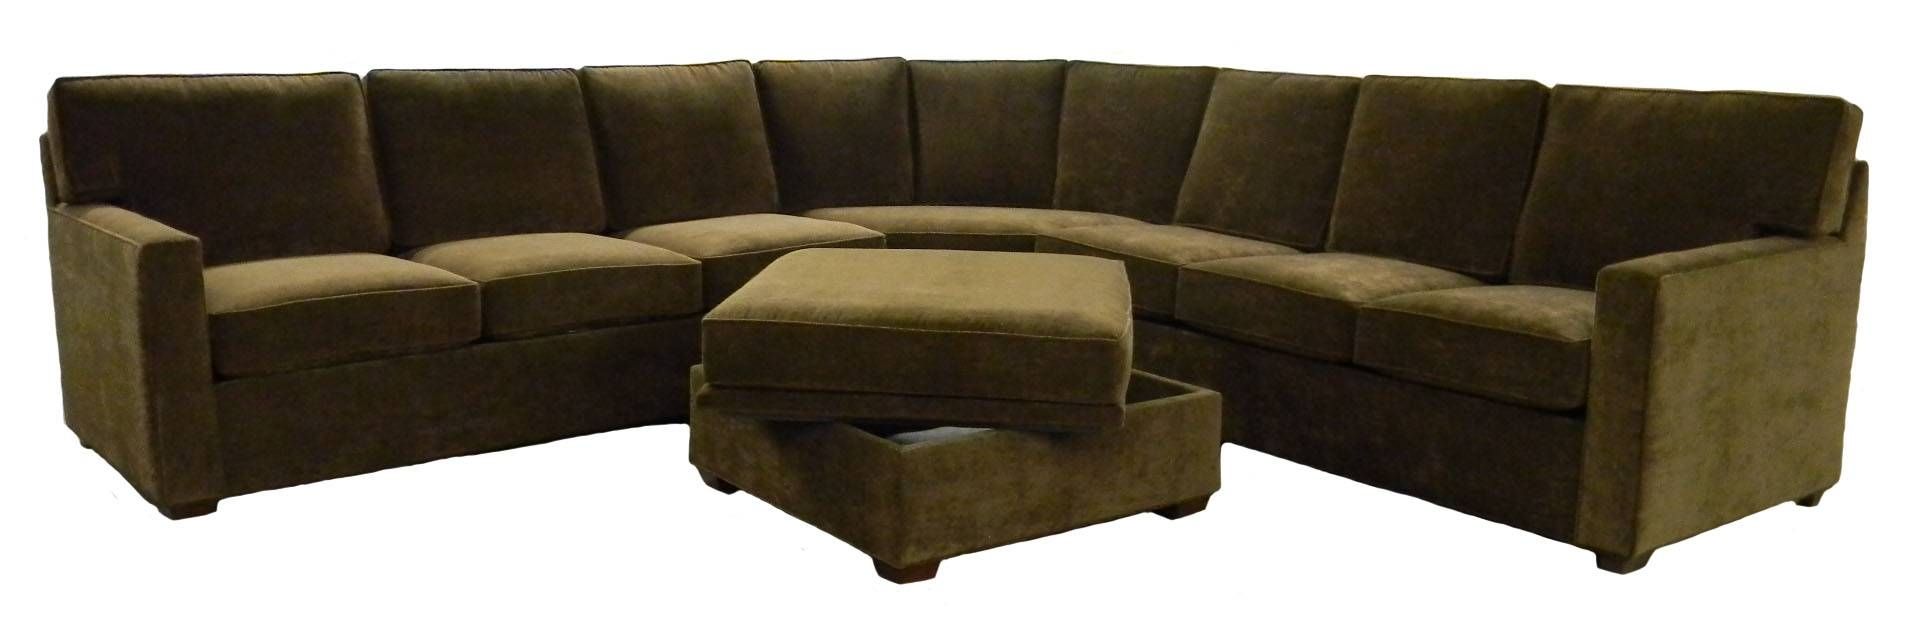 Olive Green Sectional Sofa – Hotelsbacau In Sage Green Sectional Sofas (View 12 of 15)